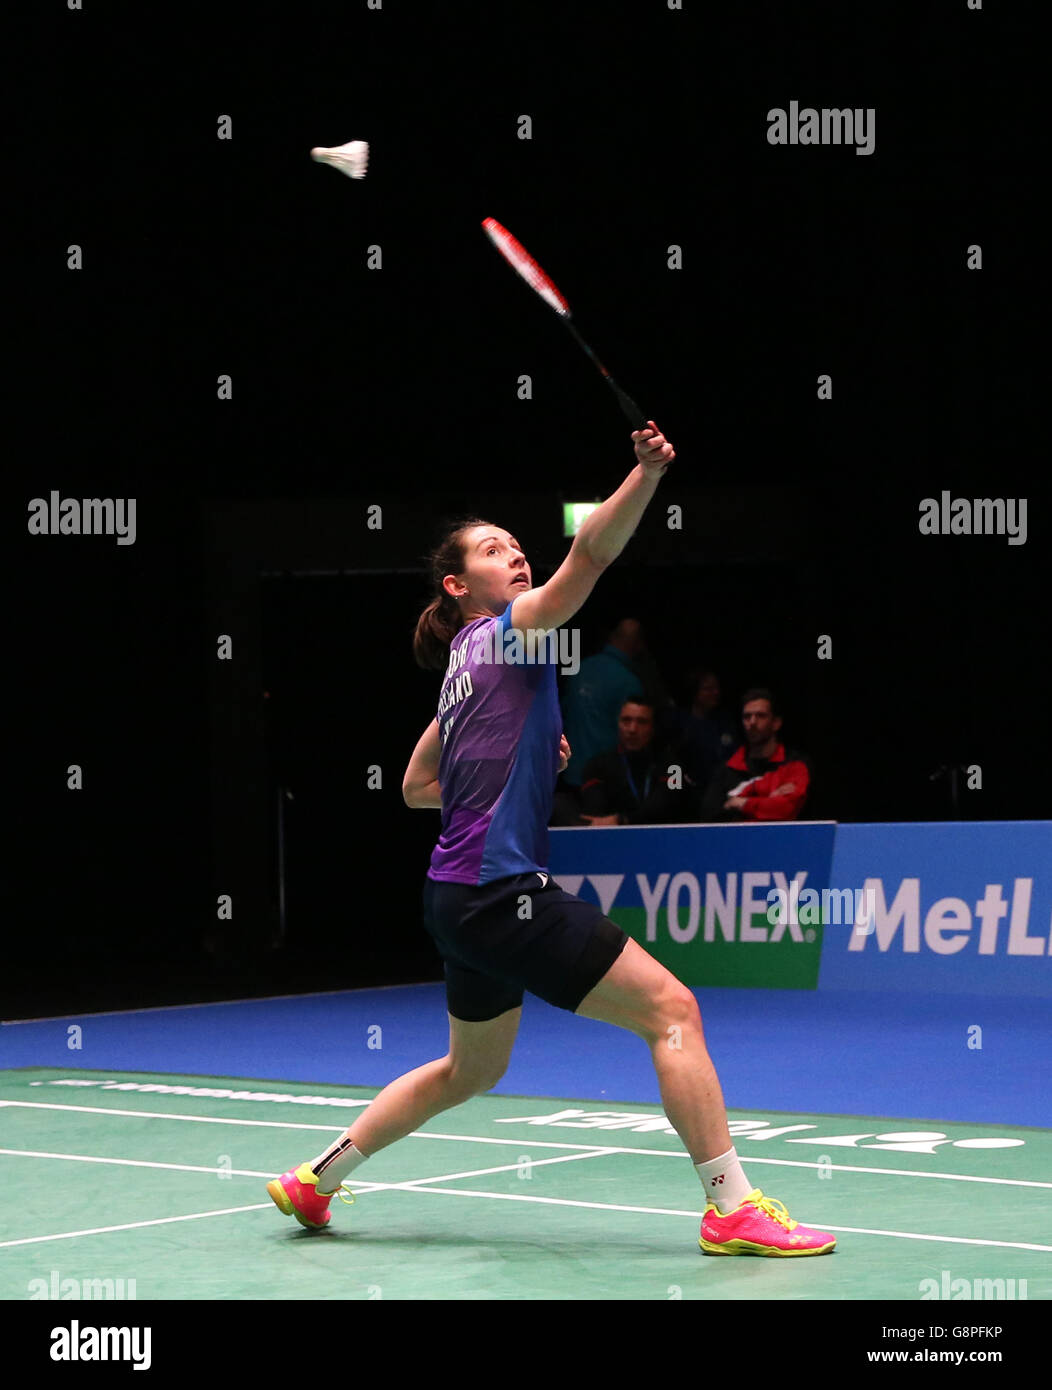 Scotland's Kirsty Gilmour in action during her single's match match during day one of the YONEX All England Open Badminton Championships at the Barclaycard Arena, Birmingham. Stock Photo